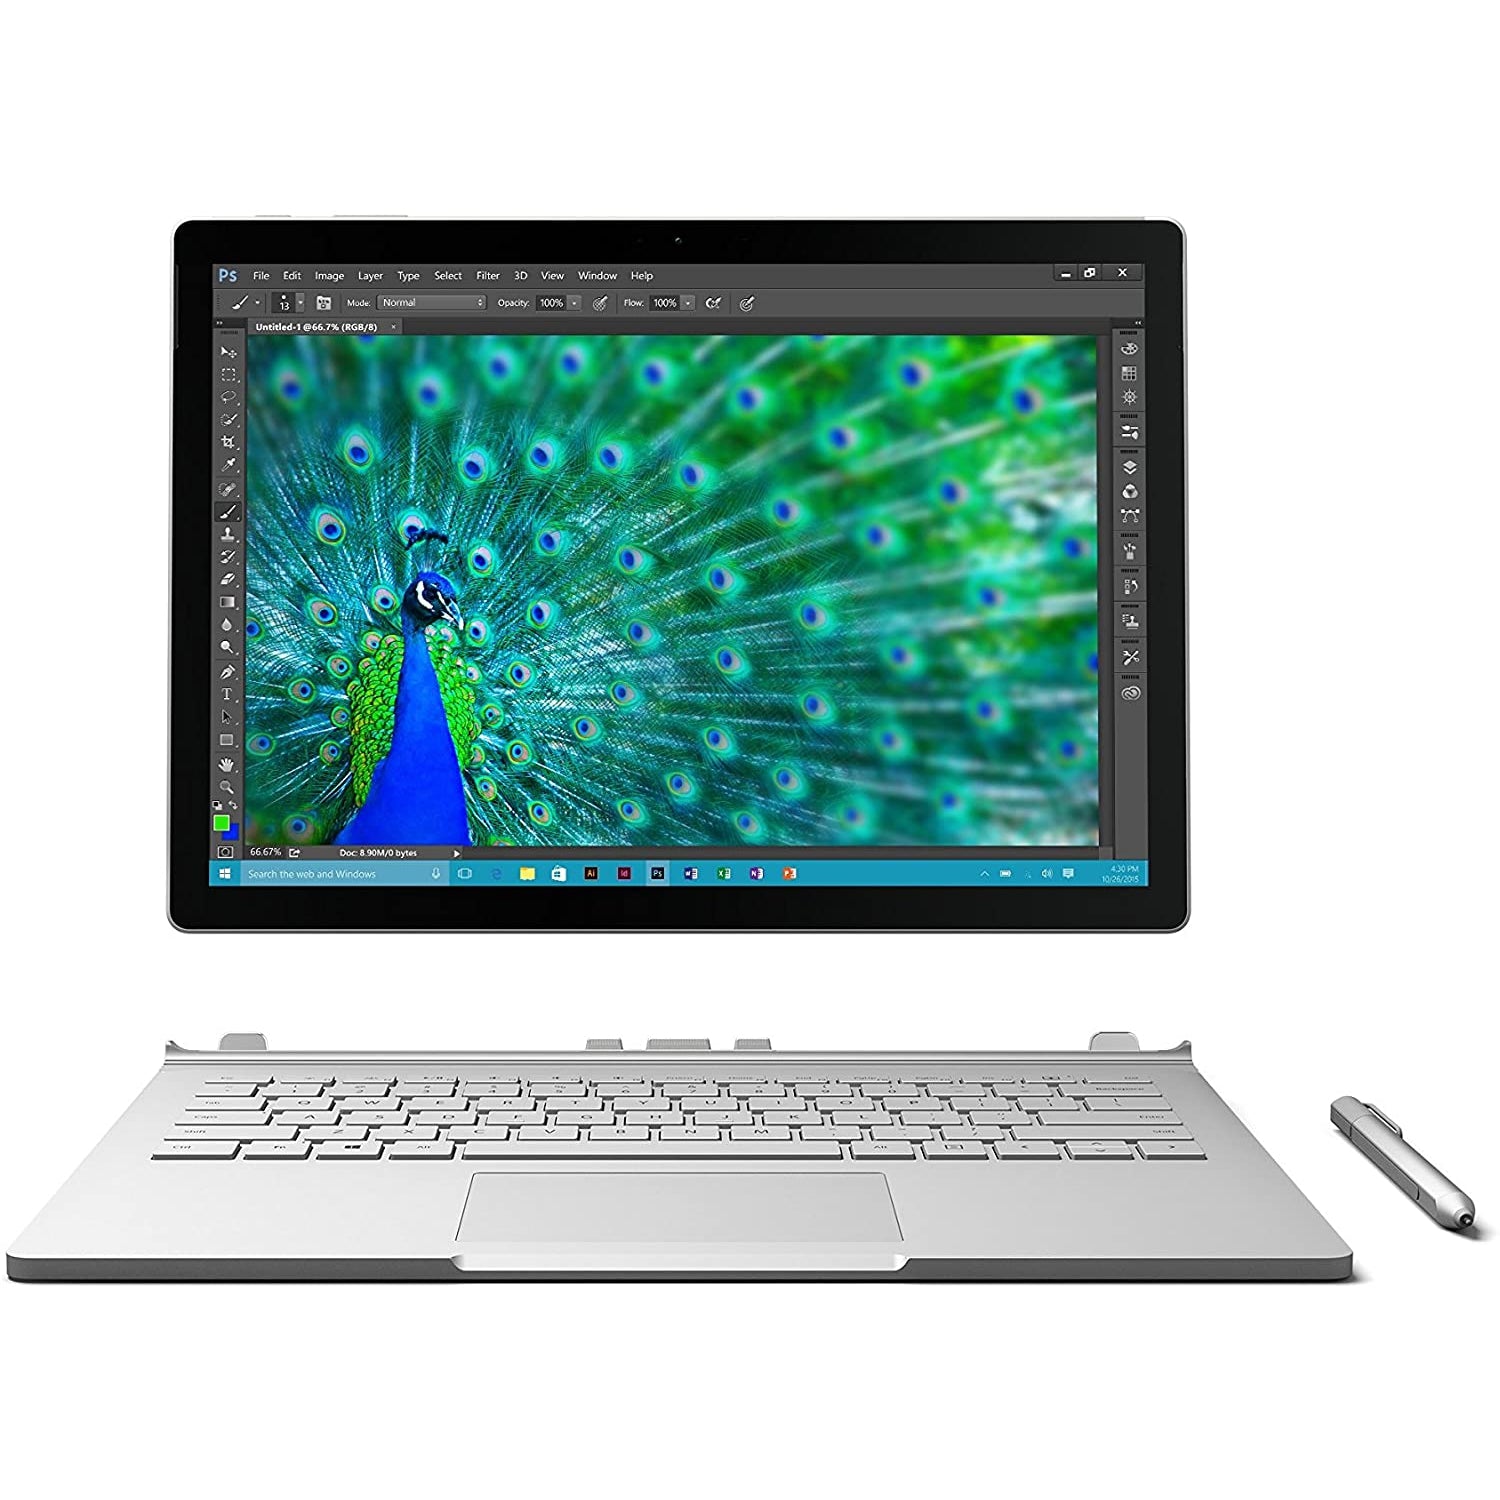 Microsoft Surface Book, Intel Core i7, 16GB RAM, 512GB SSD, 13.5", Silver - Refurbished Excellent - No Charger